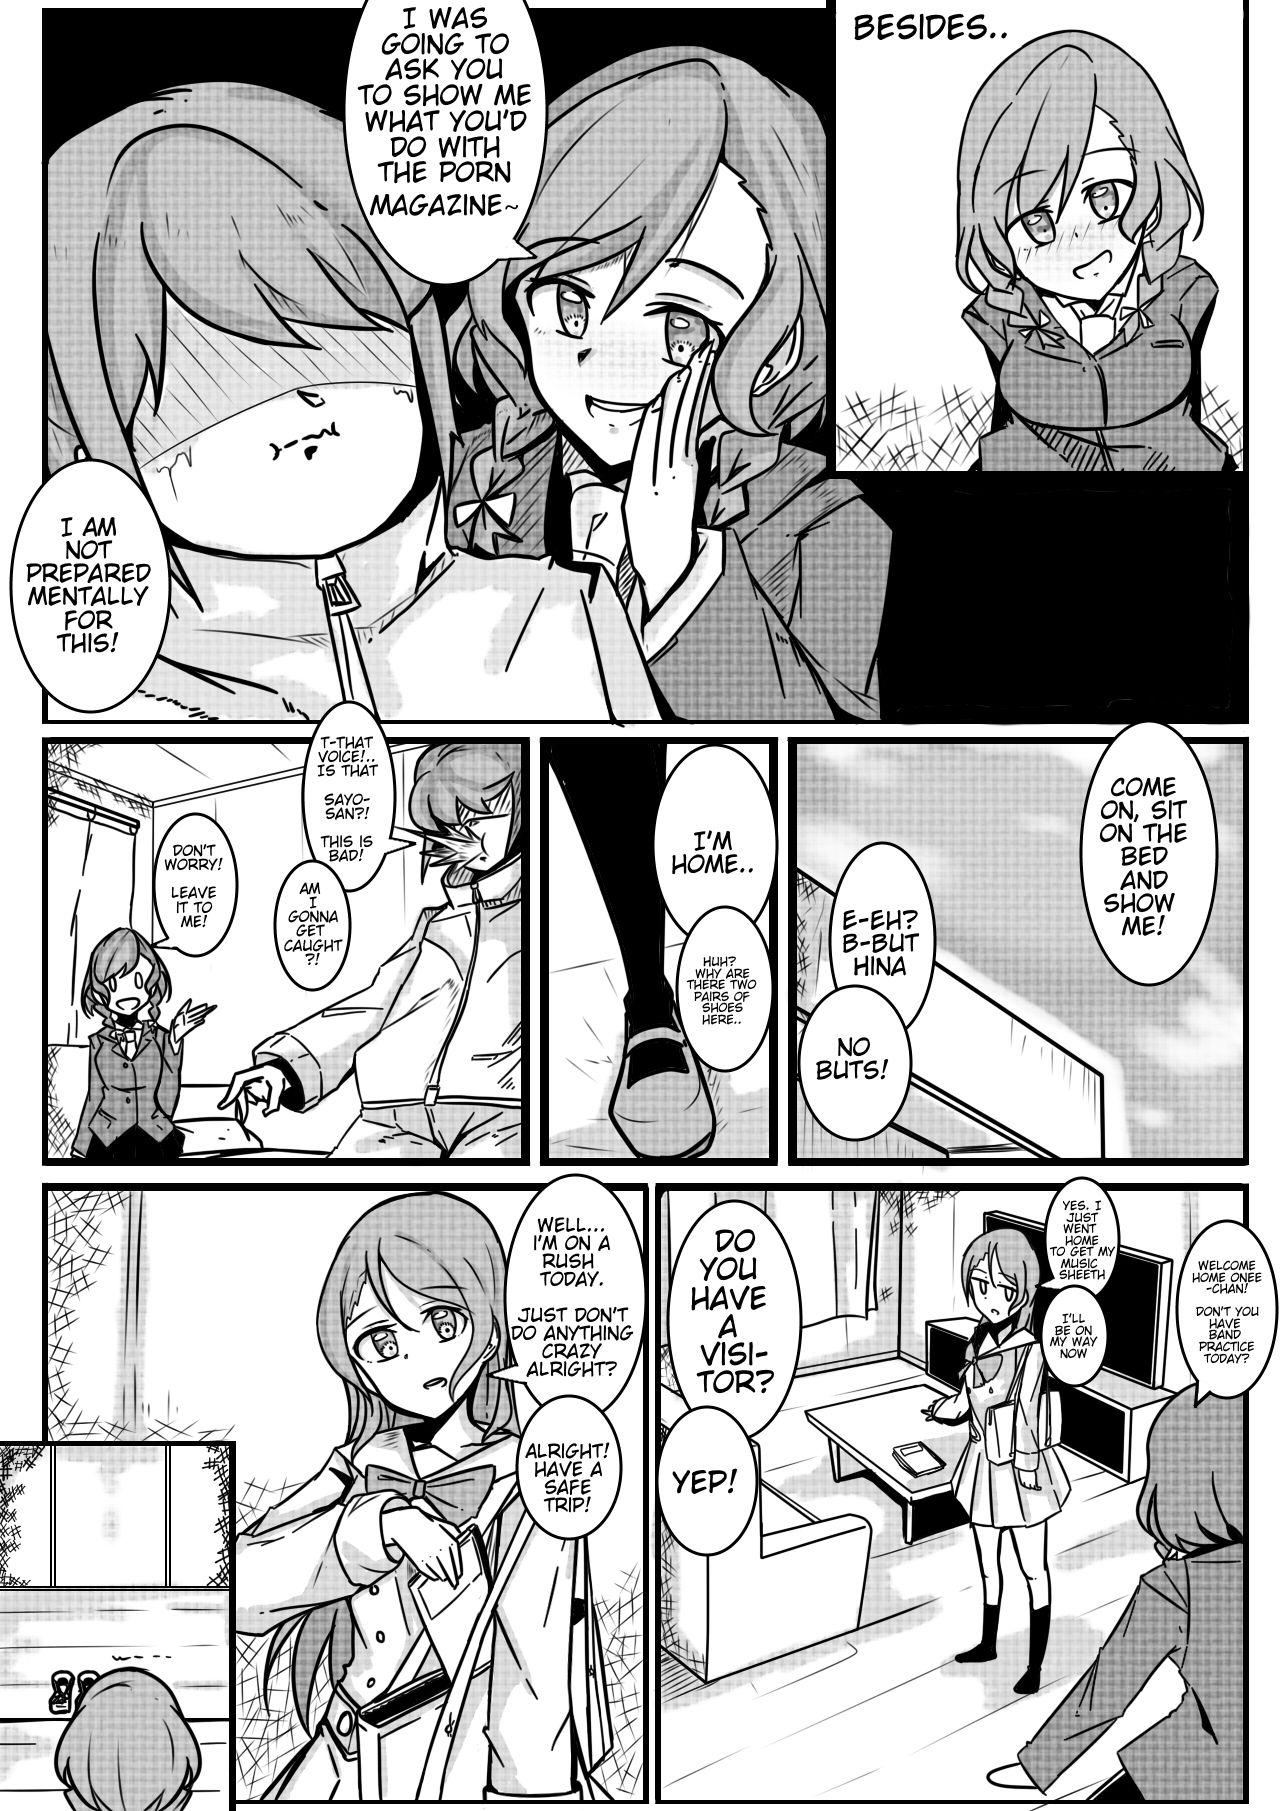 Hungarian Minty Surprise - Bang dream Pussyeating - Page 8